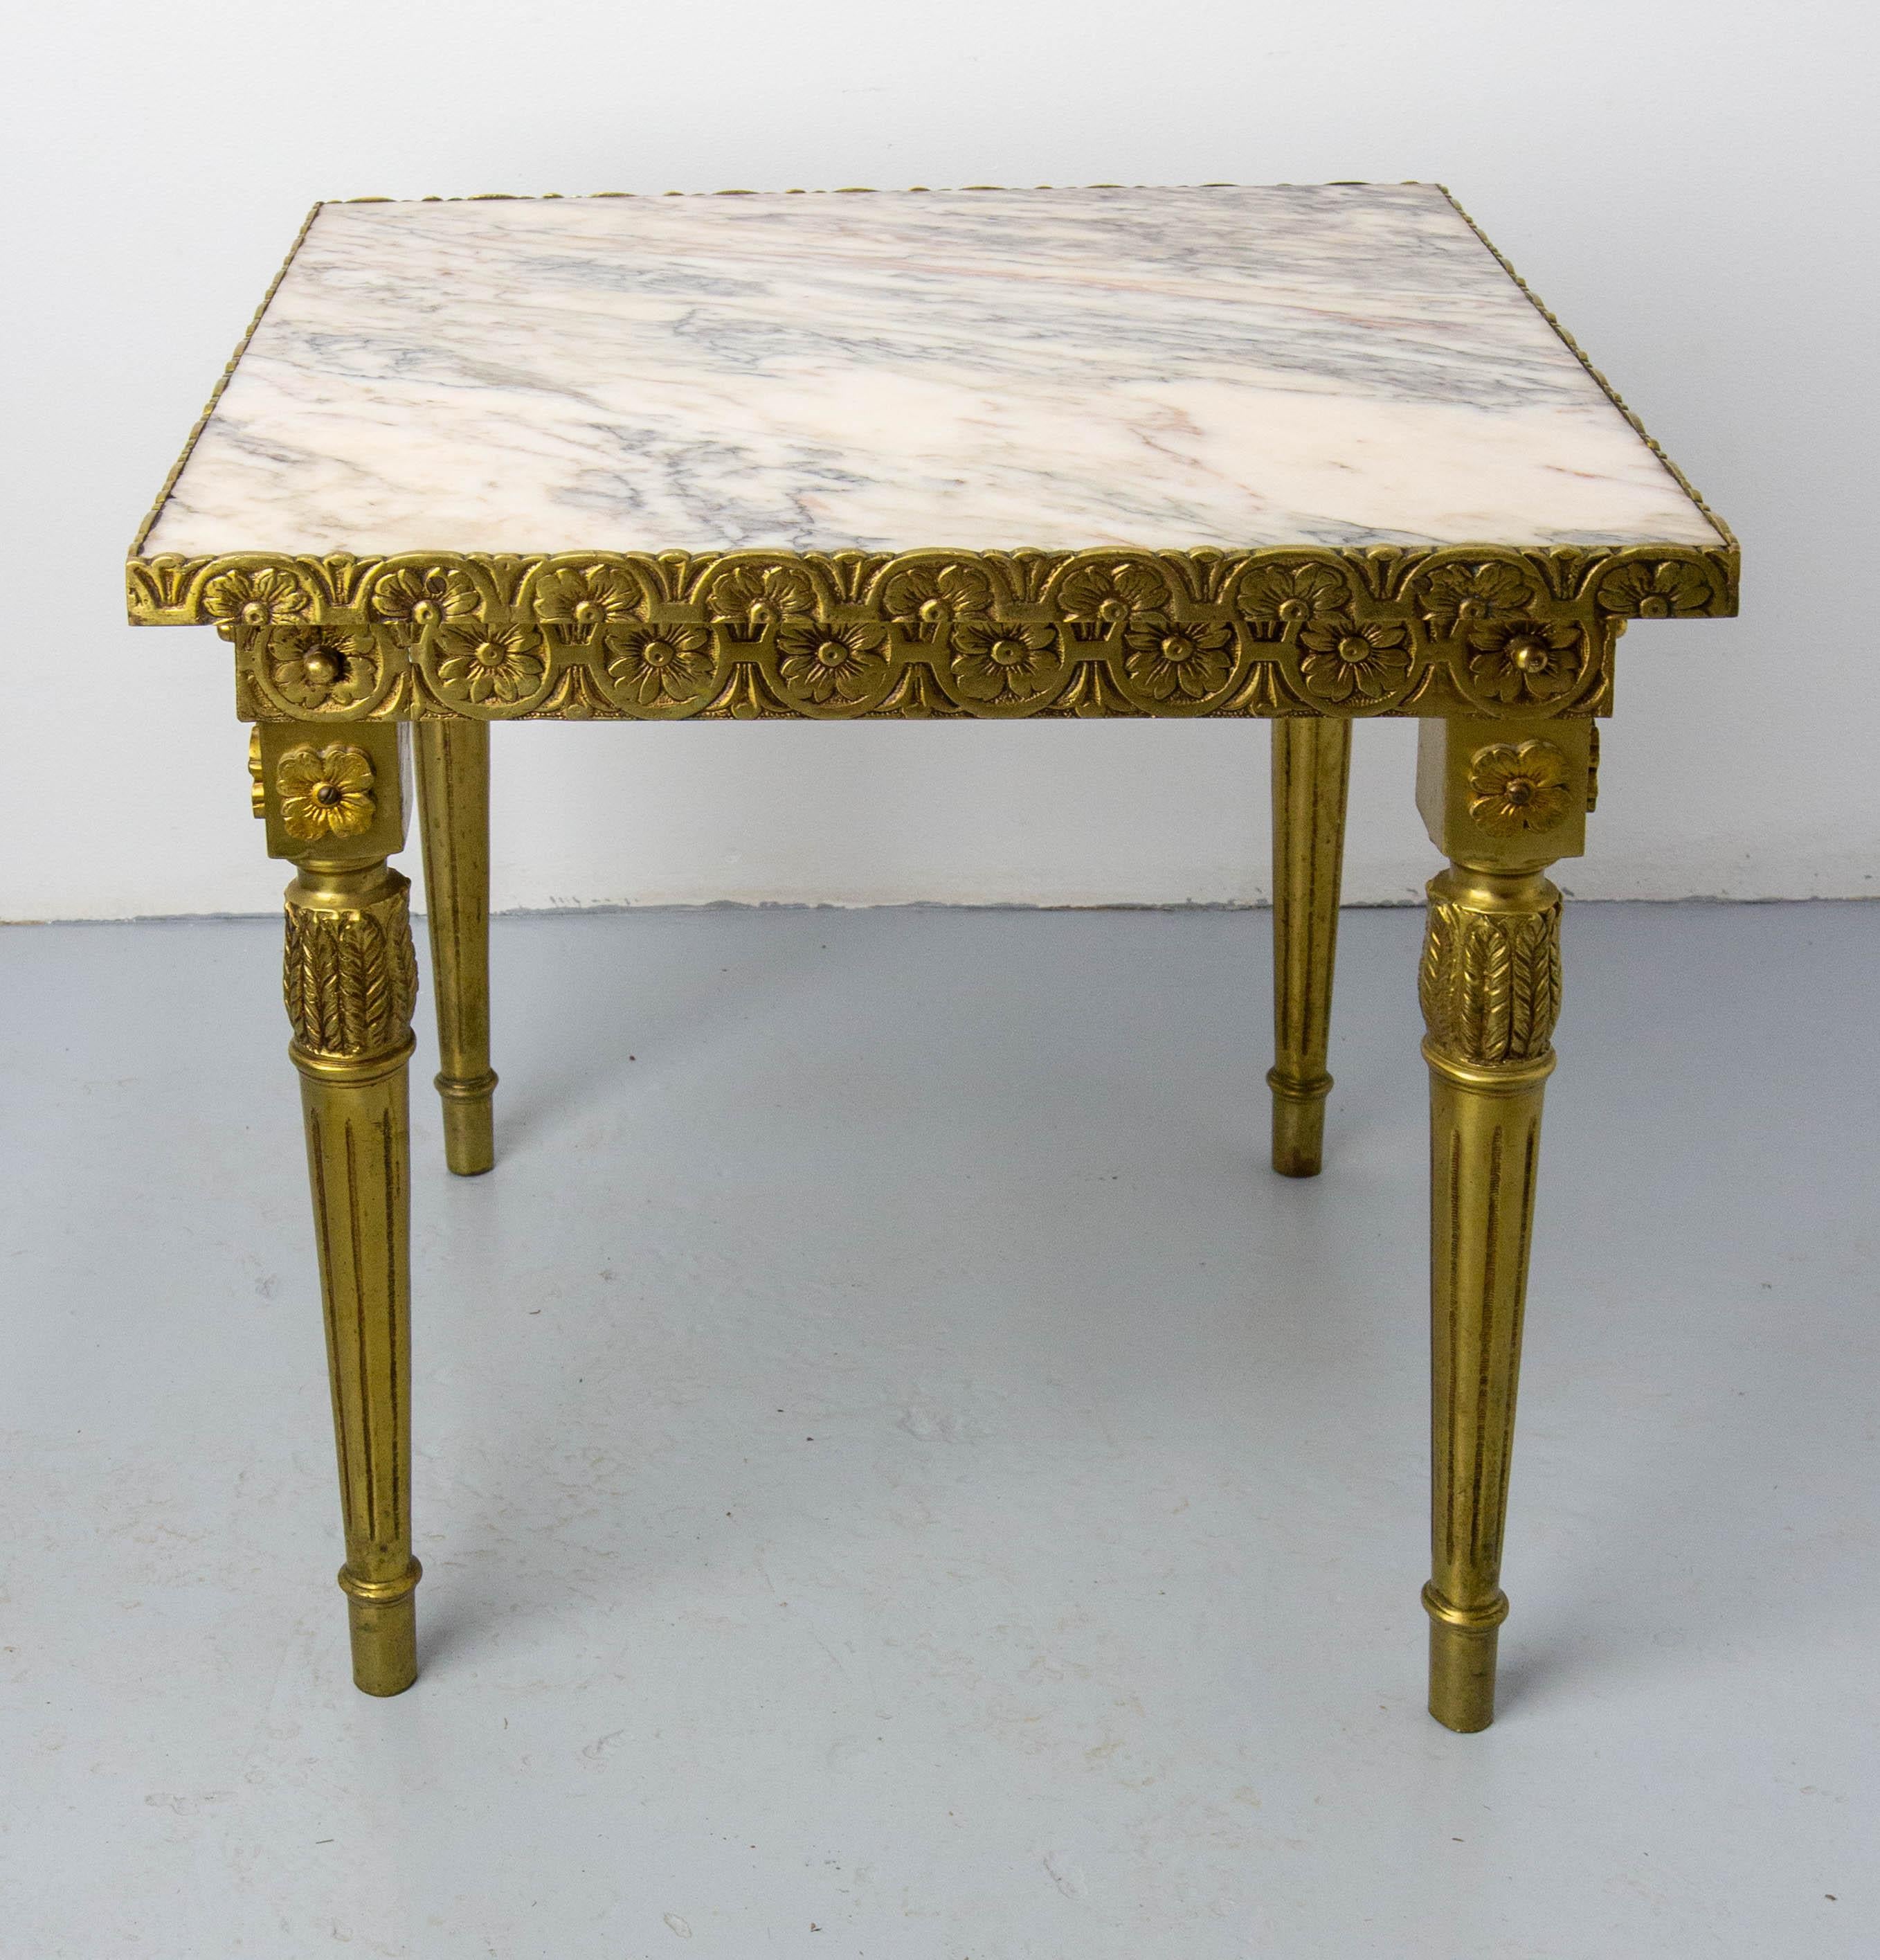 French Louis XVI style side table with marble-top and brass legs
Very good quality marble
Very good vintage condition with only very minor marks of use.

shipping:
46 / 46 / 42 cm 23.2 kg